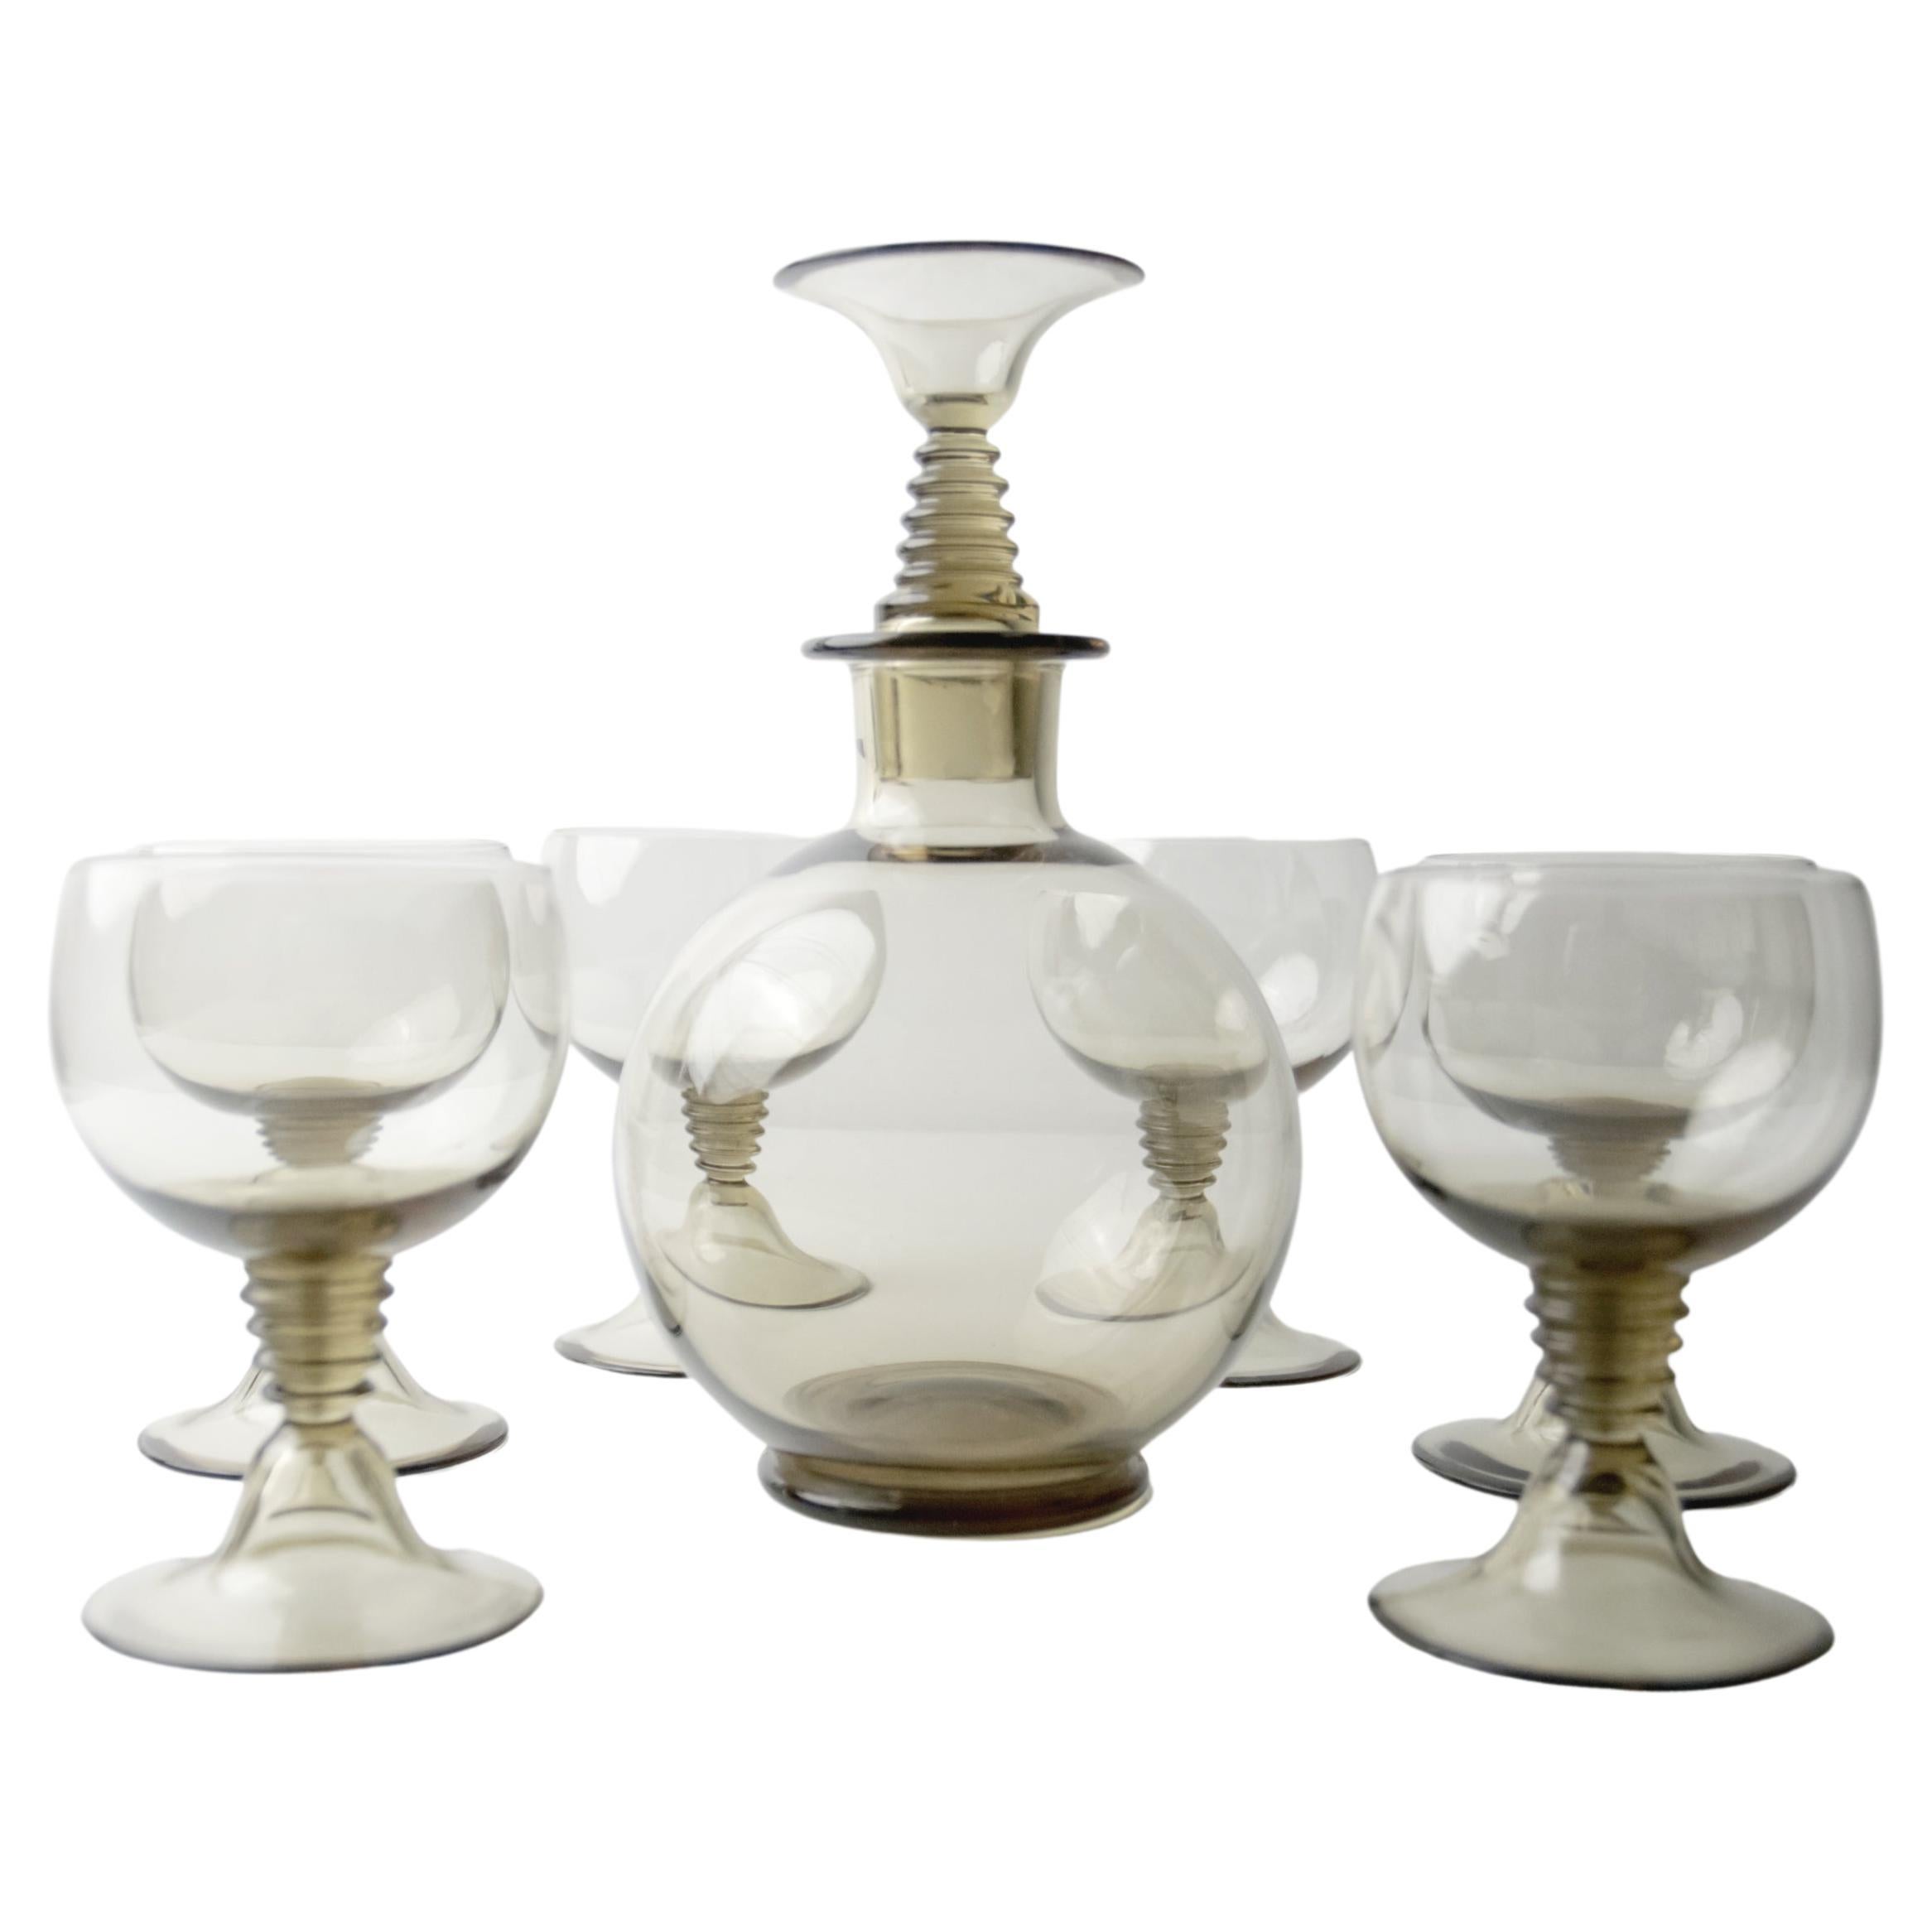 Set of 7 Art Deco "Traditie"  W.J. Rozendaal 1932-'33 Decanter and 6 Glasses For Sale